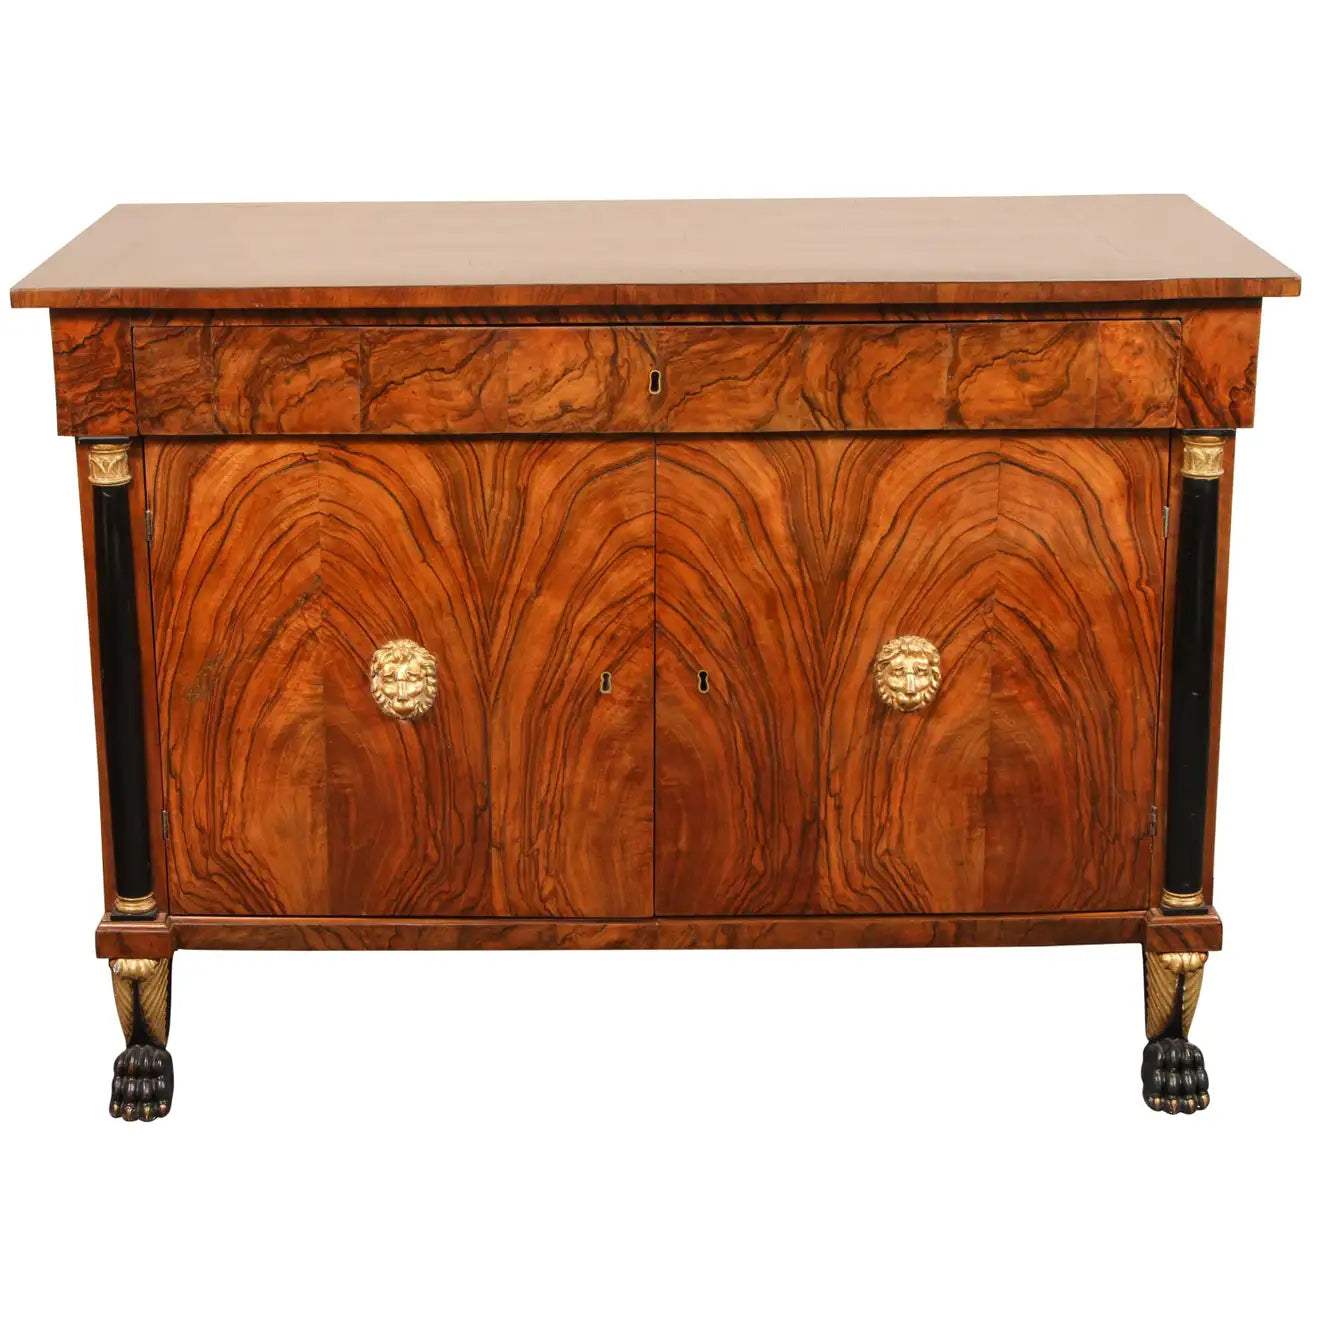 Second Empire Style Burled Walnut Cabinet